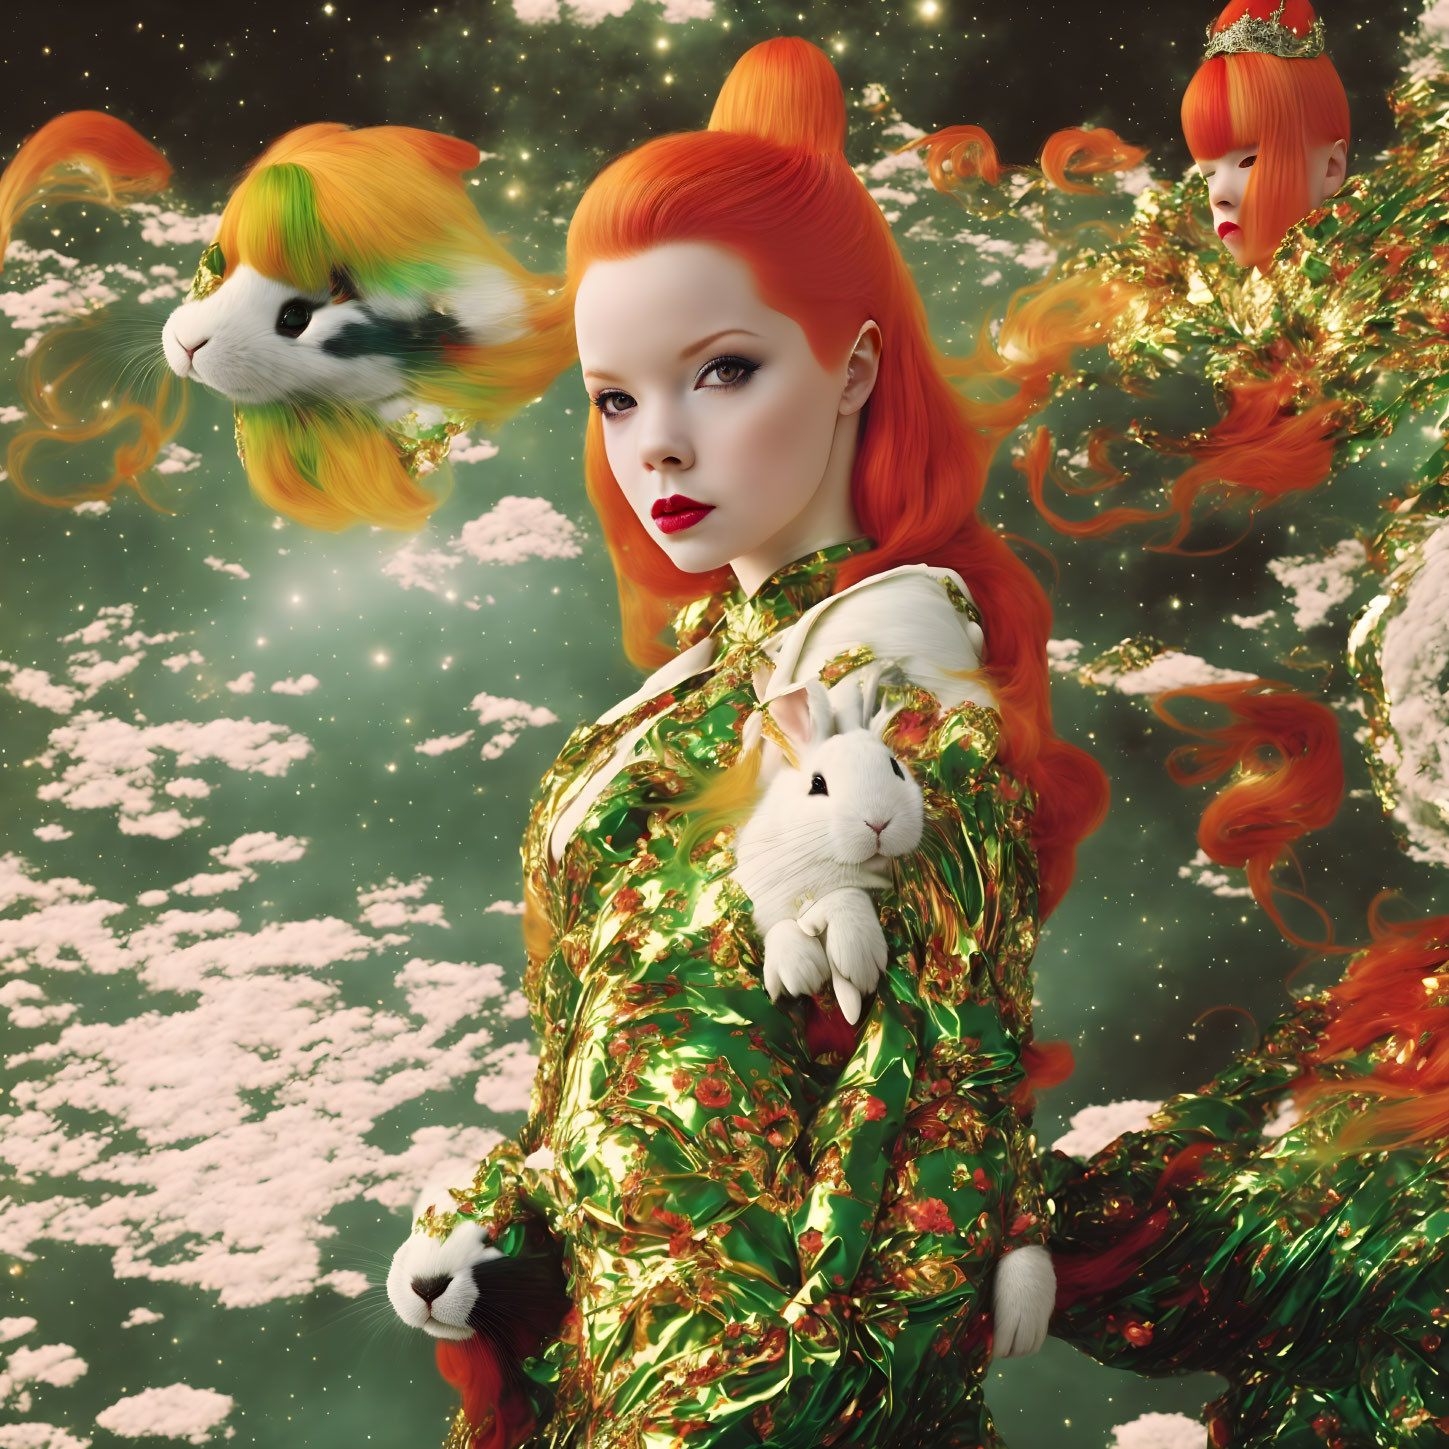 Surreal image of woman with red hair holding rabbit in vibrant outfit